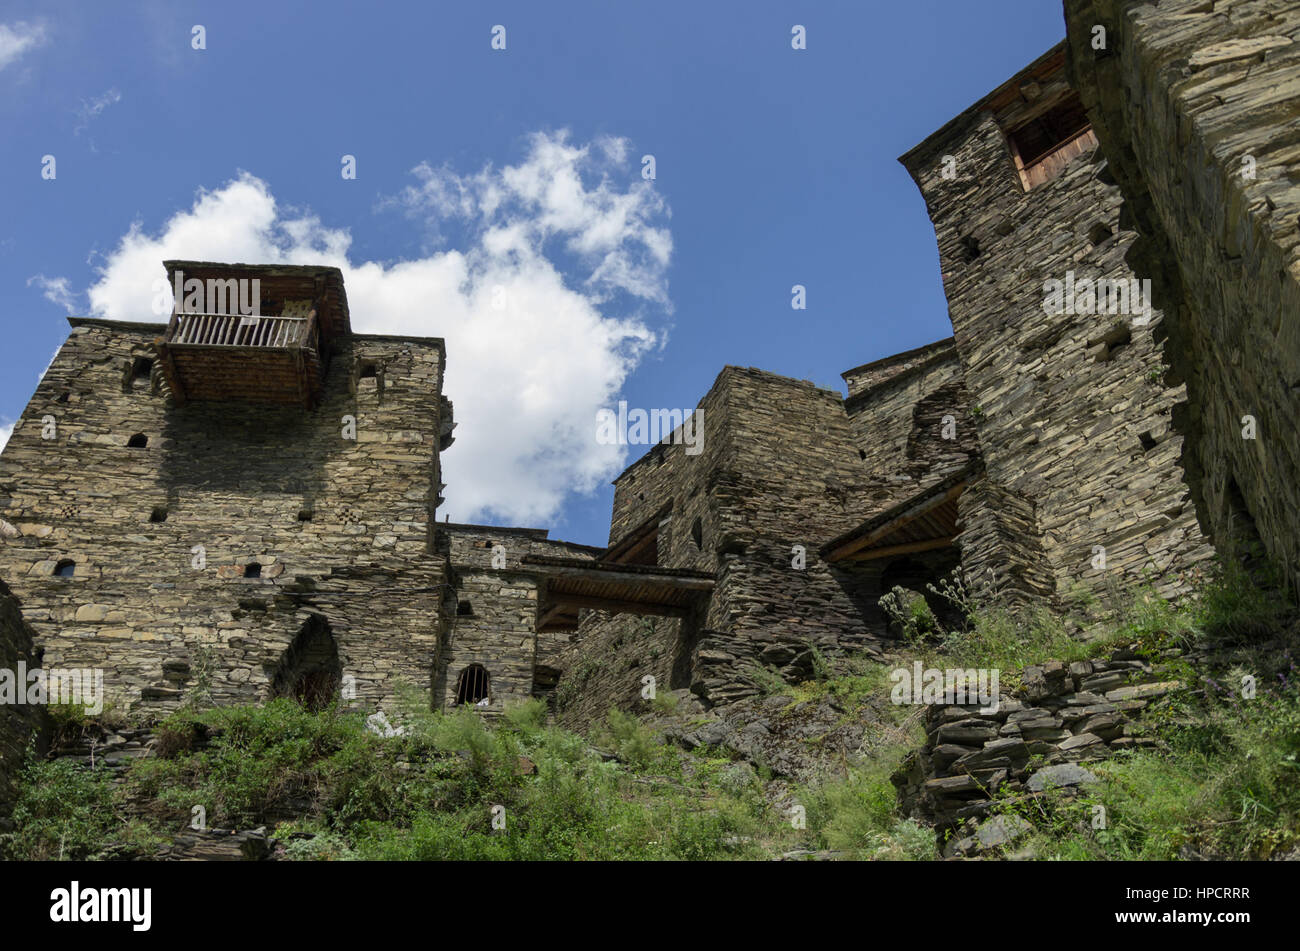 Shatili. Abandoned fortified village with watch towers in Georgia. Caucasus mountains Stock Photo